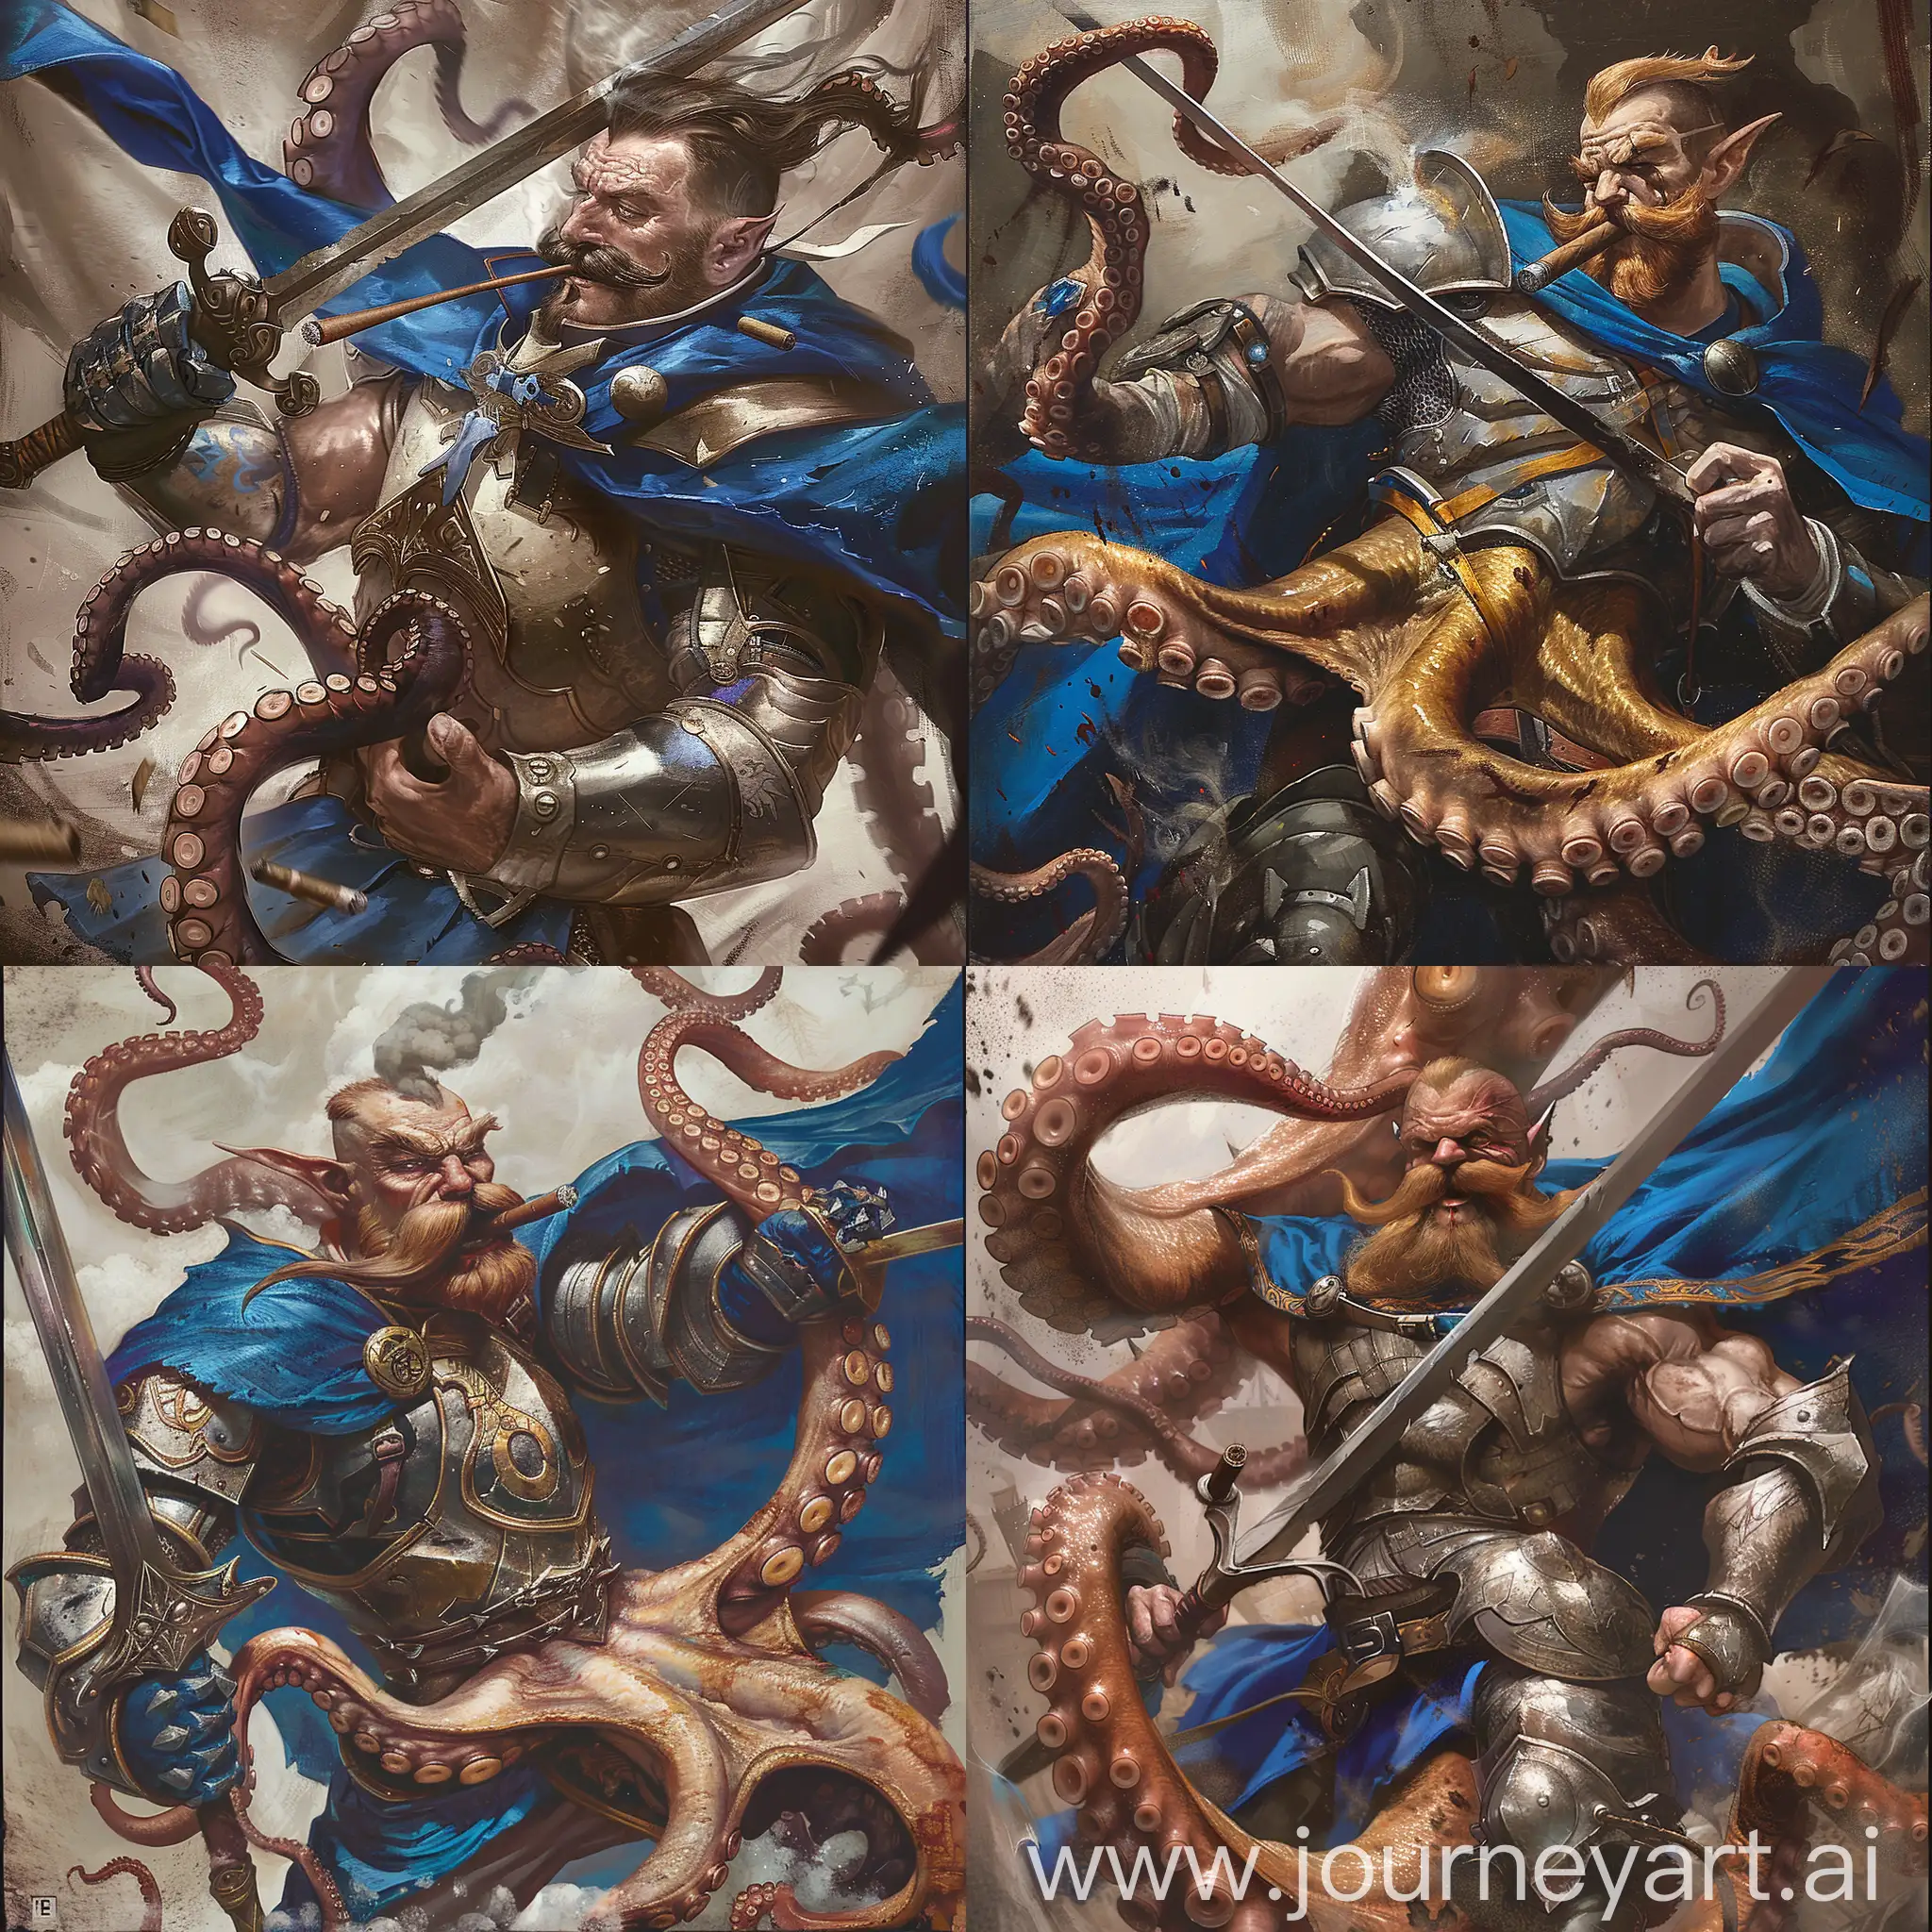 Heroic-Fighter-Gryff-Battling-Giant-Octopus-in-Plate-Armor-and-Blue-Cape